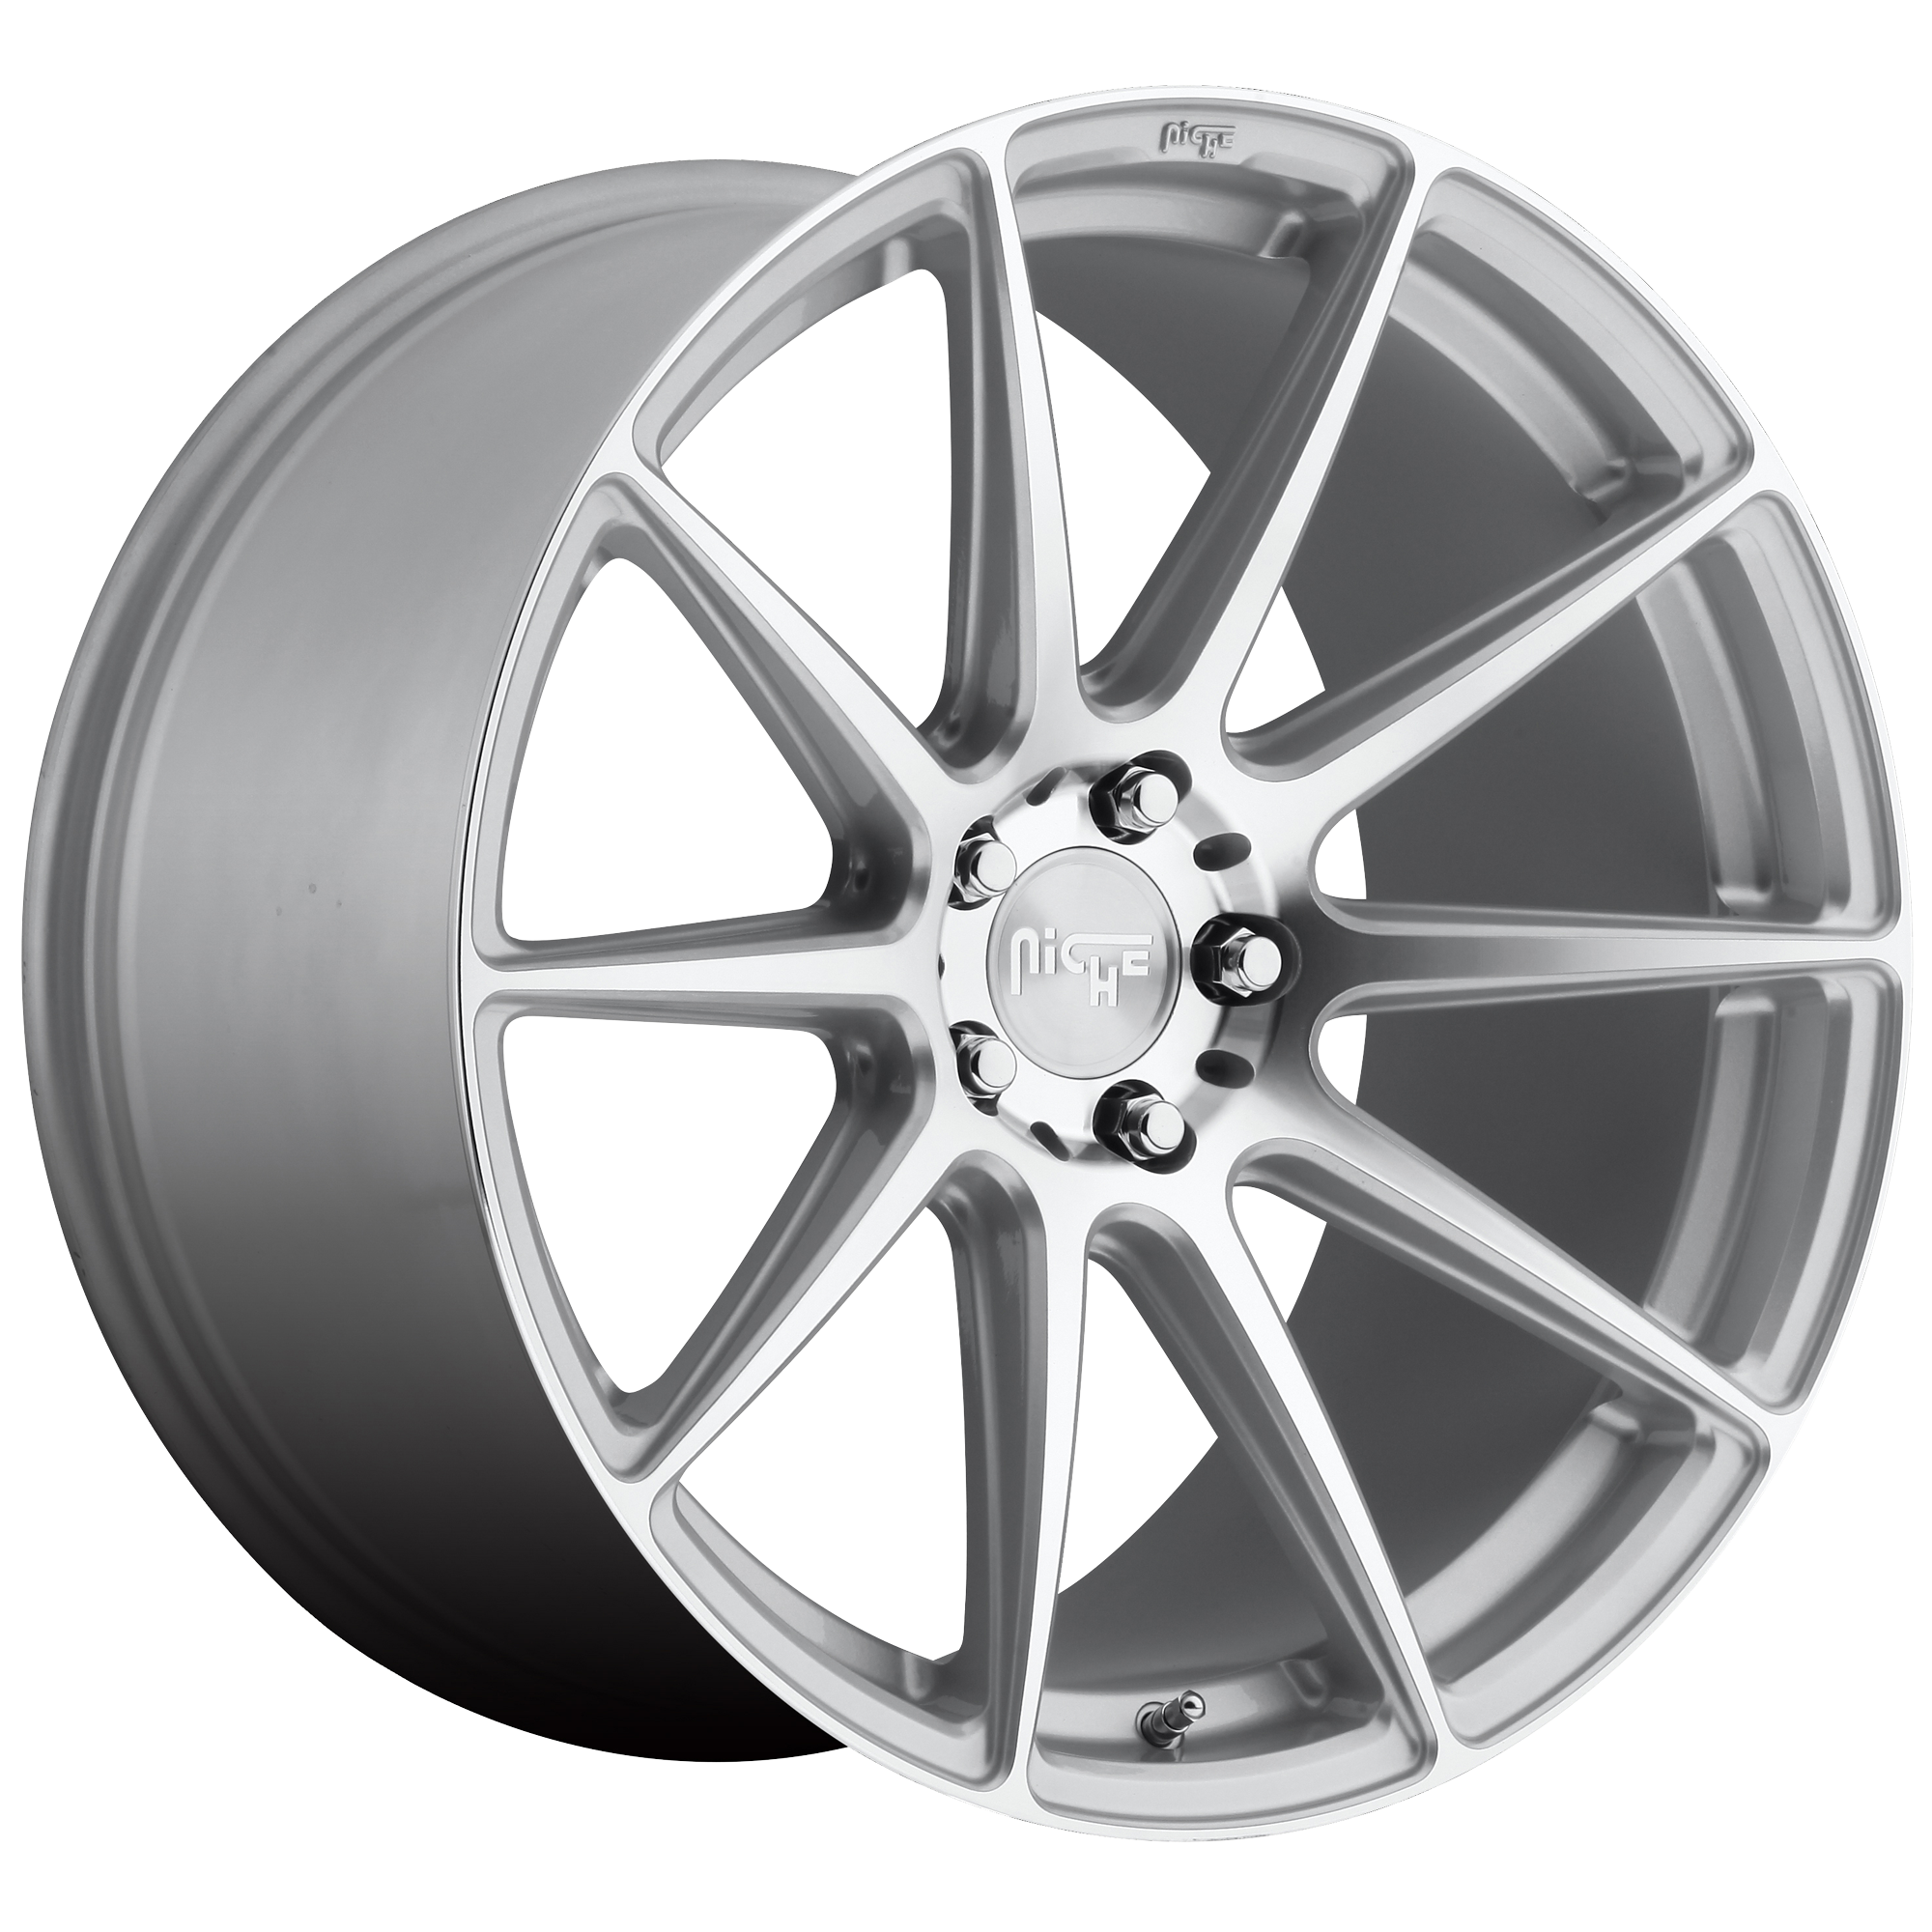 ESSEN 21x9 5x120.00 GLOSS SILVER MACHINED (35 mm) - Tires and Engine Performance